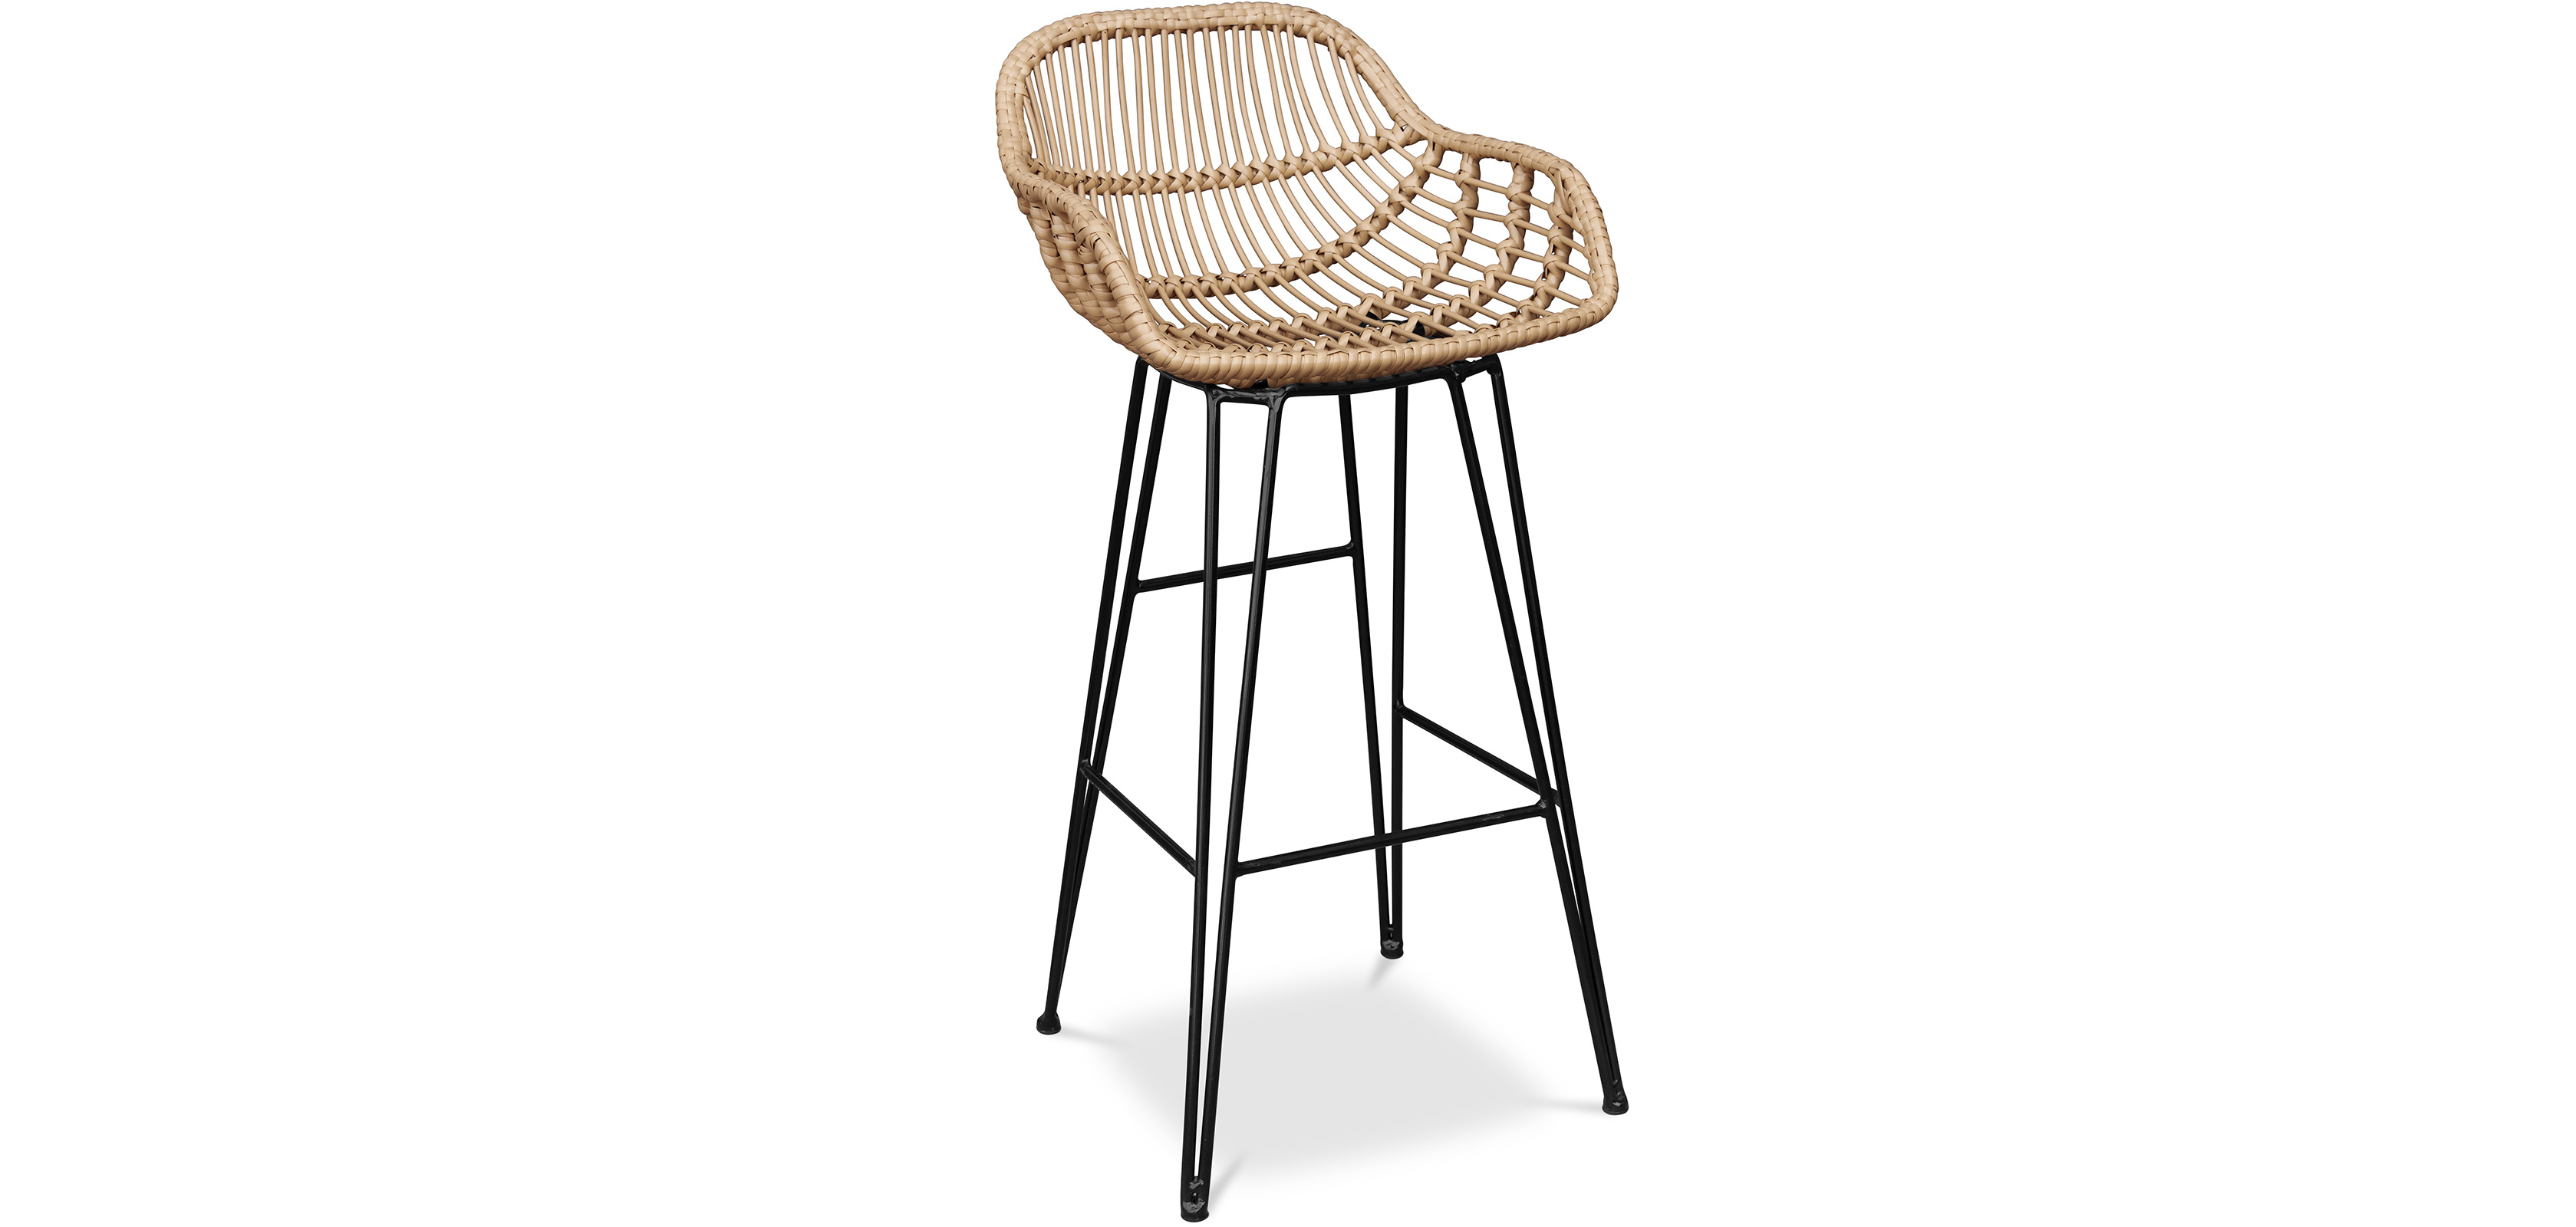 Buy Synthetic wicker bar stool - Magony Natural wood 59256 - in the EU